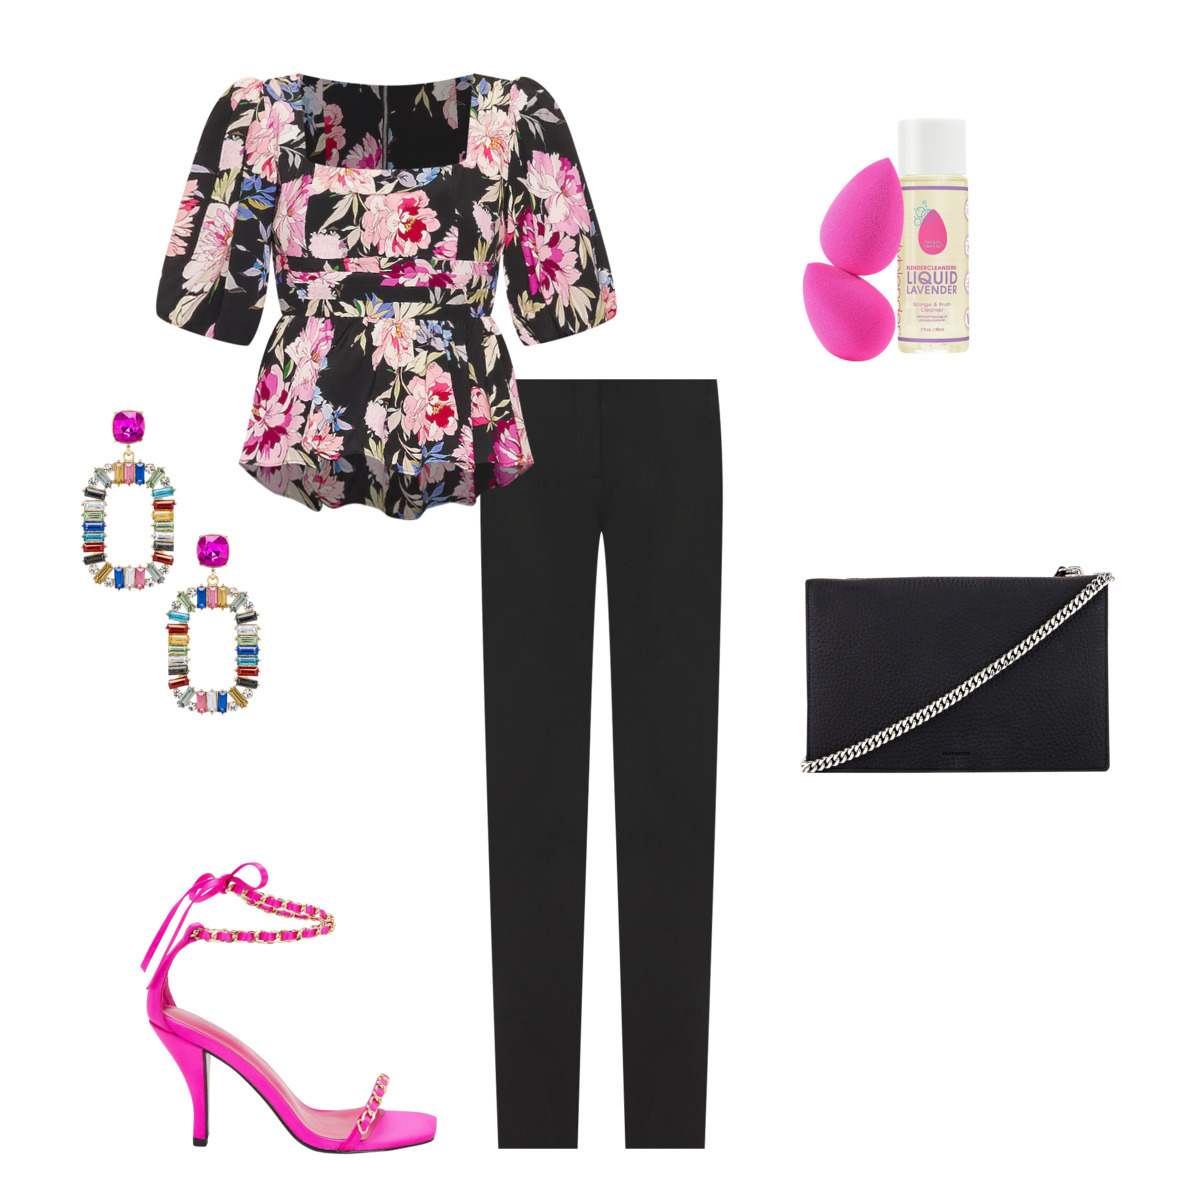 Revolve outfit featuring a black floral blouse, black skinny slacks, black purse, hot pink heeled sandals, and multi-colored rhinestone earrings. Outfit powered by Stylitics for Shoptalk Style guide.